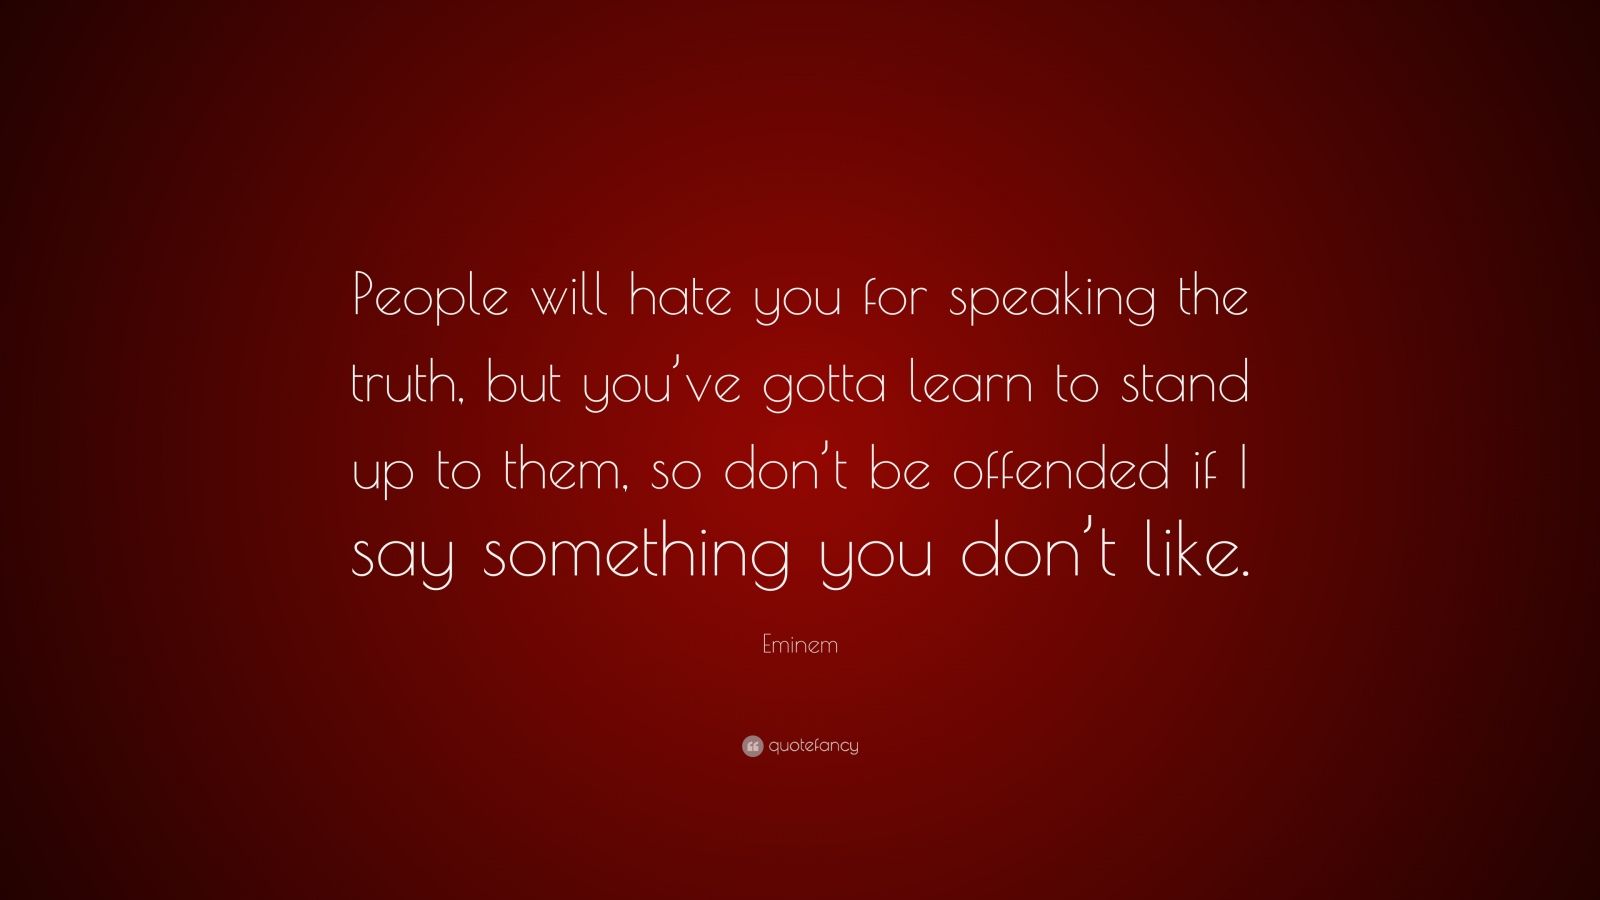 Eminem Quote: “People will hate you for speaking the truth, but you’ve